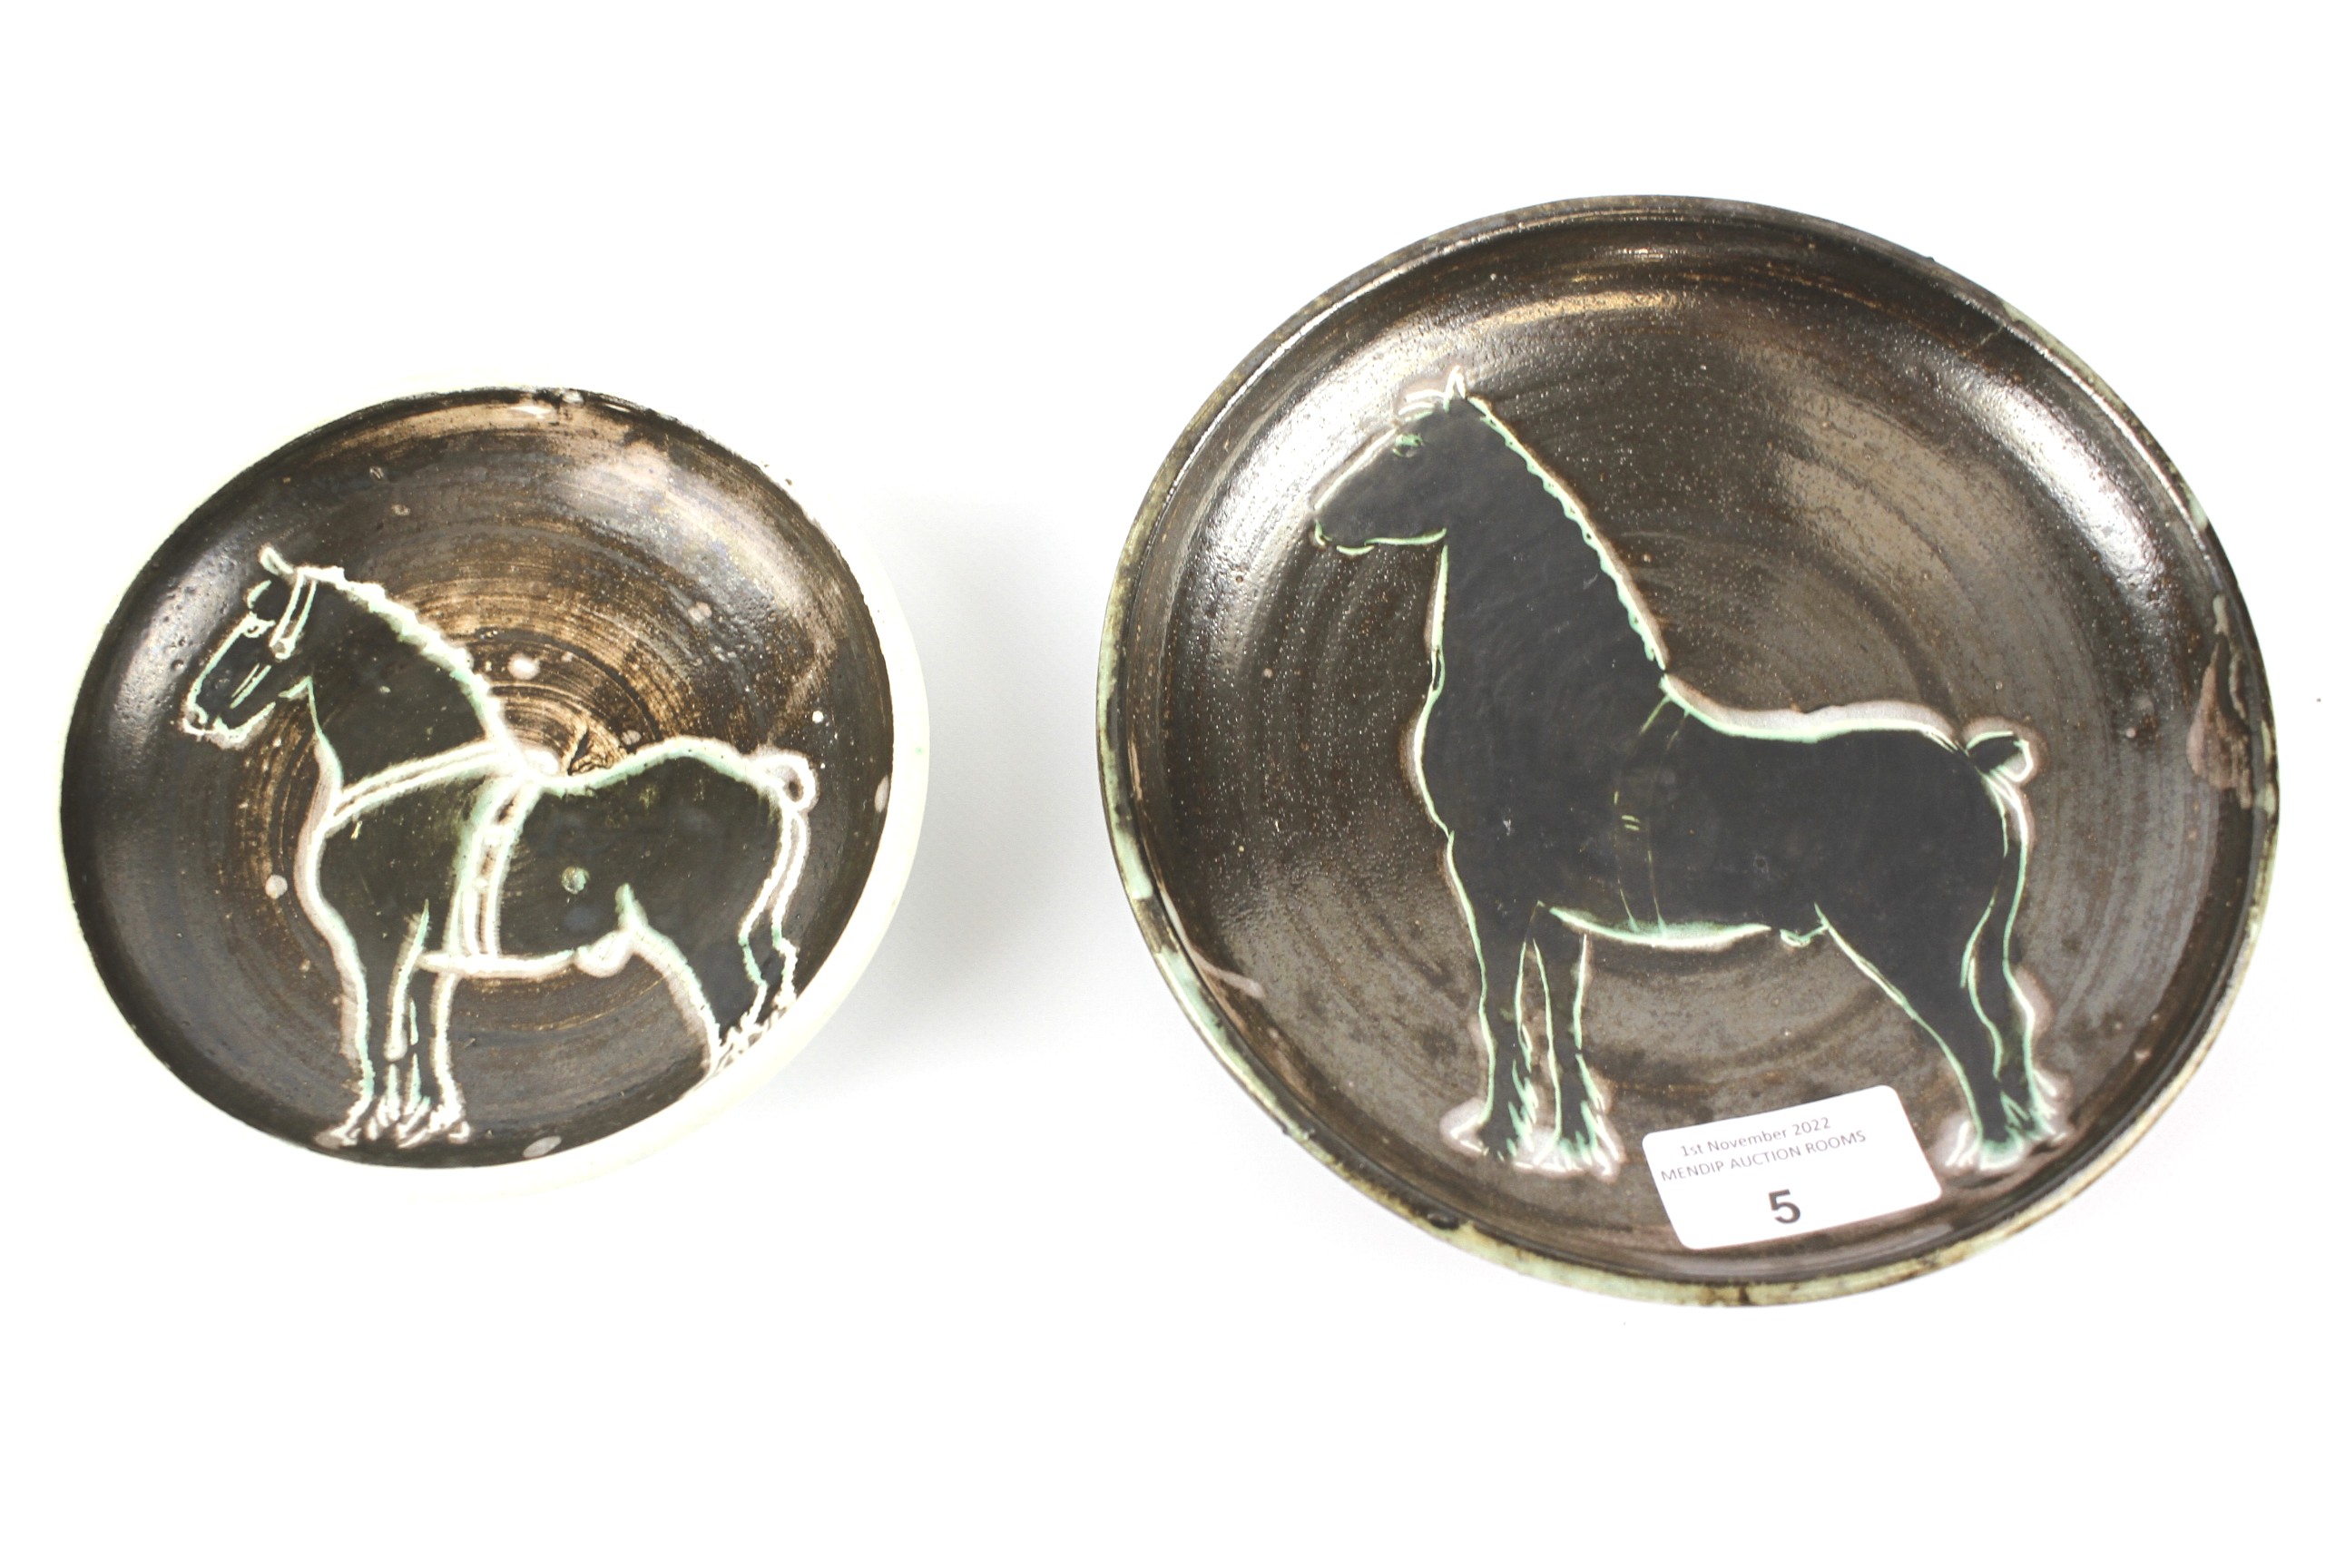 Two contemporary Wye studio pottery dishes.